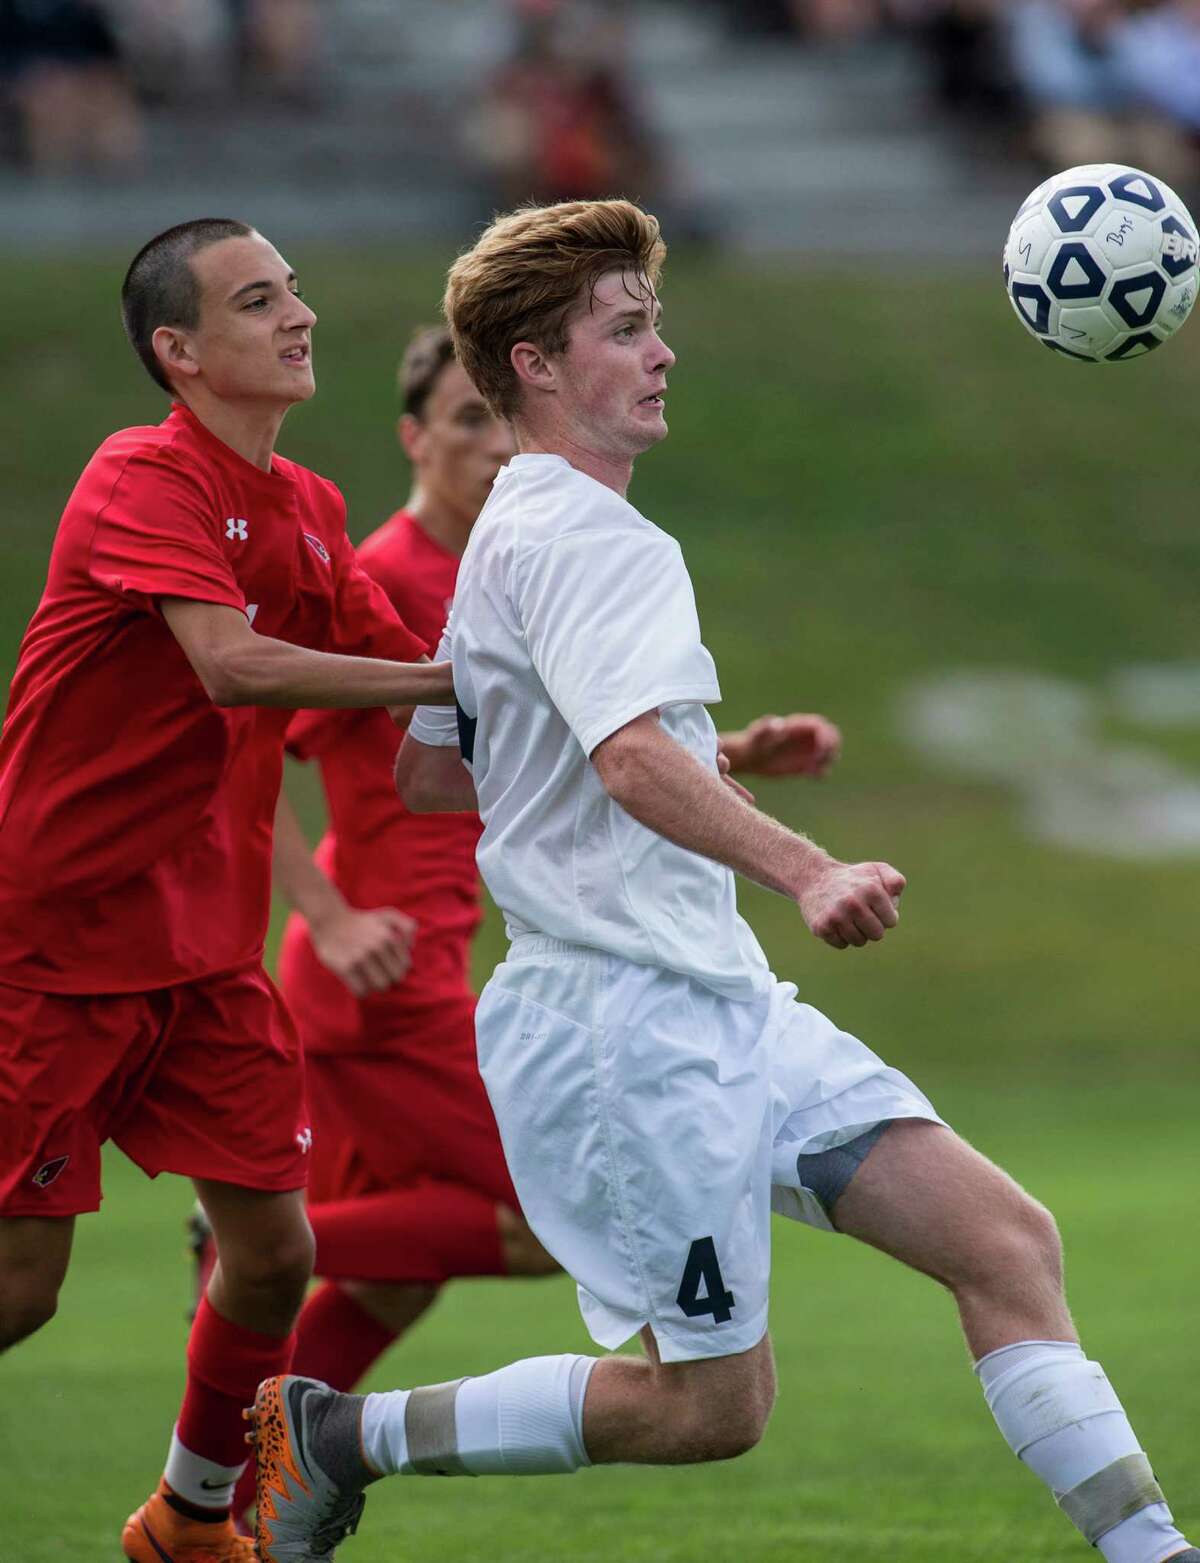 Greenwich High School against Staples High School during a boys soccer game played at Staples High School, Westport, CT on Tuesday, September 22, 2015.